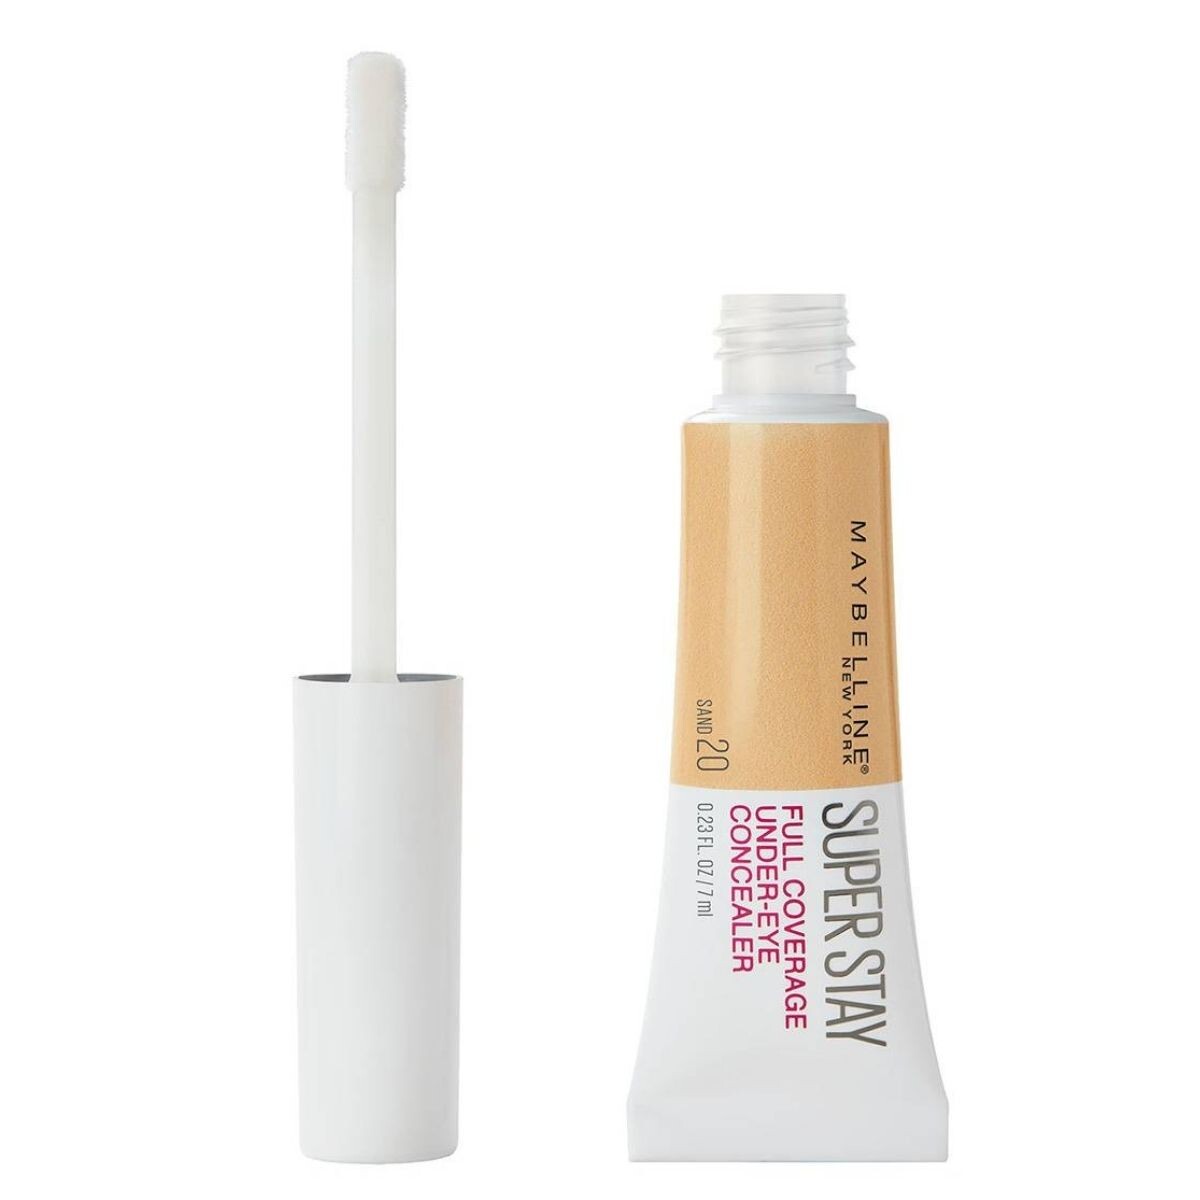 Corrector líquido Maybelline Super Stay 24 hrs - Sand 